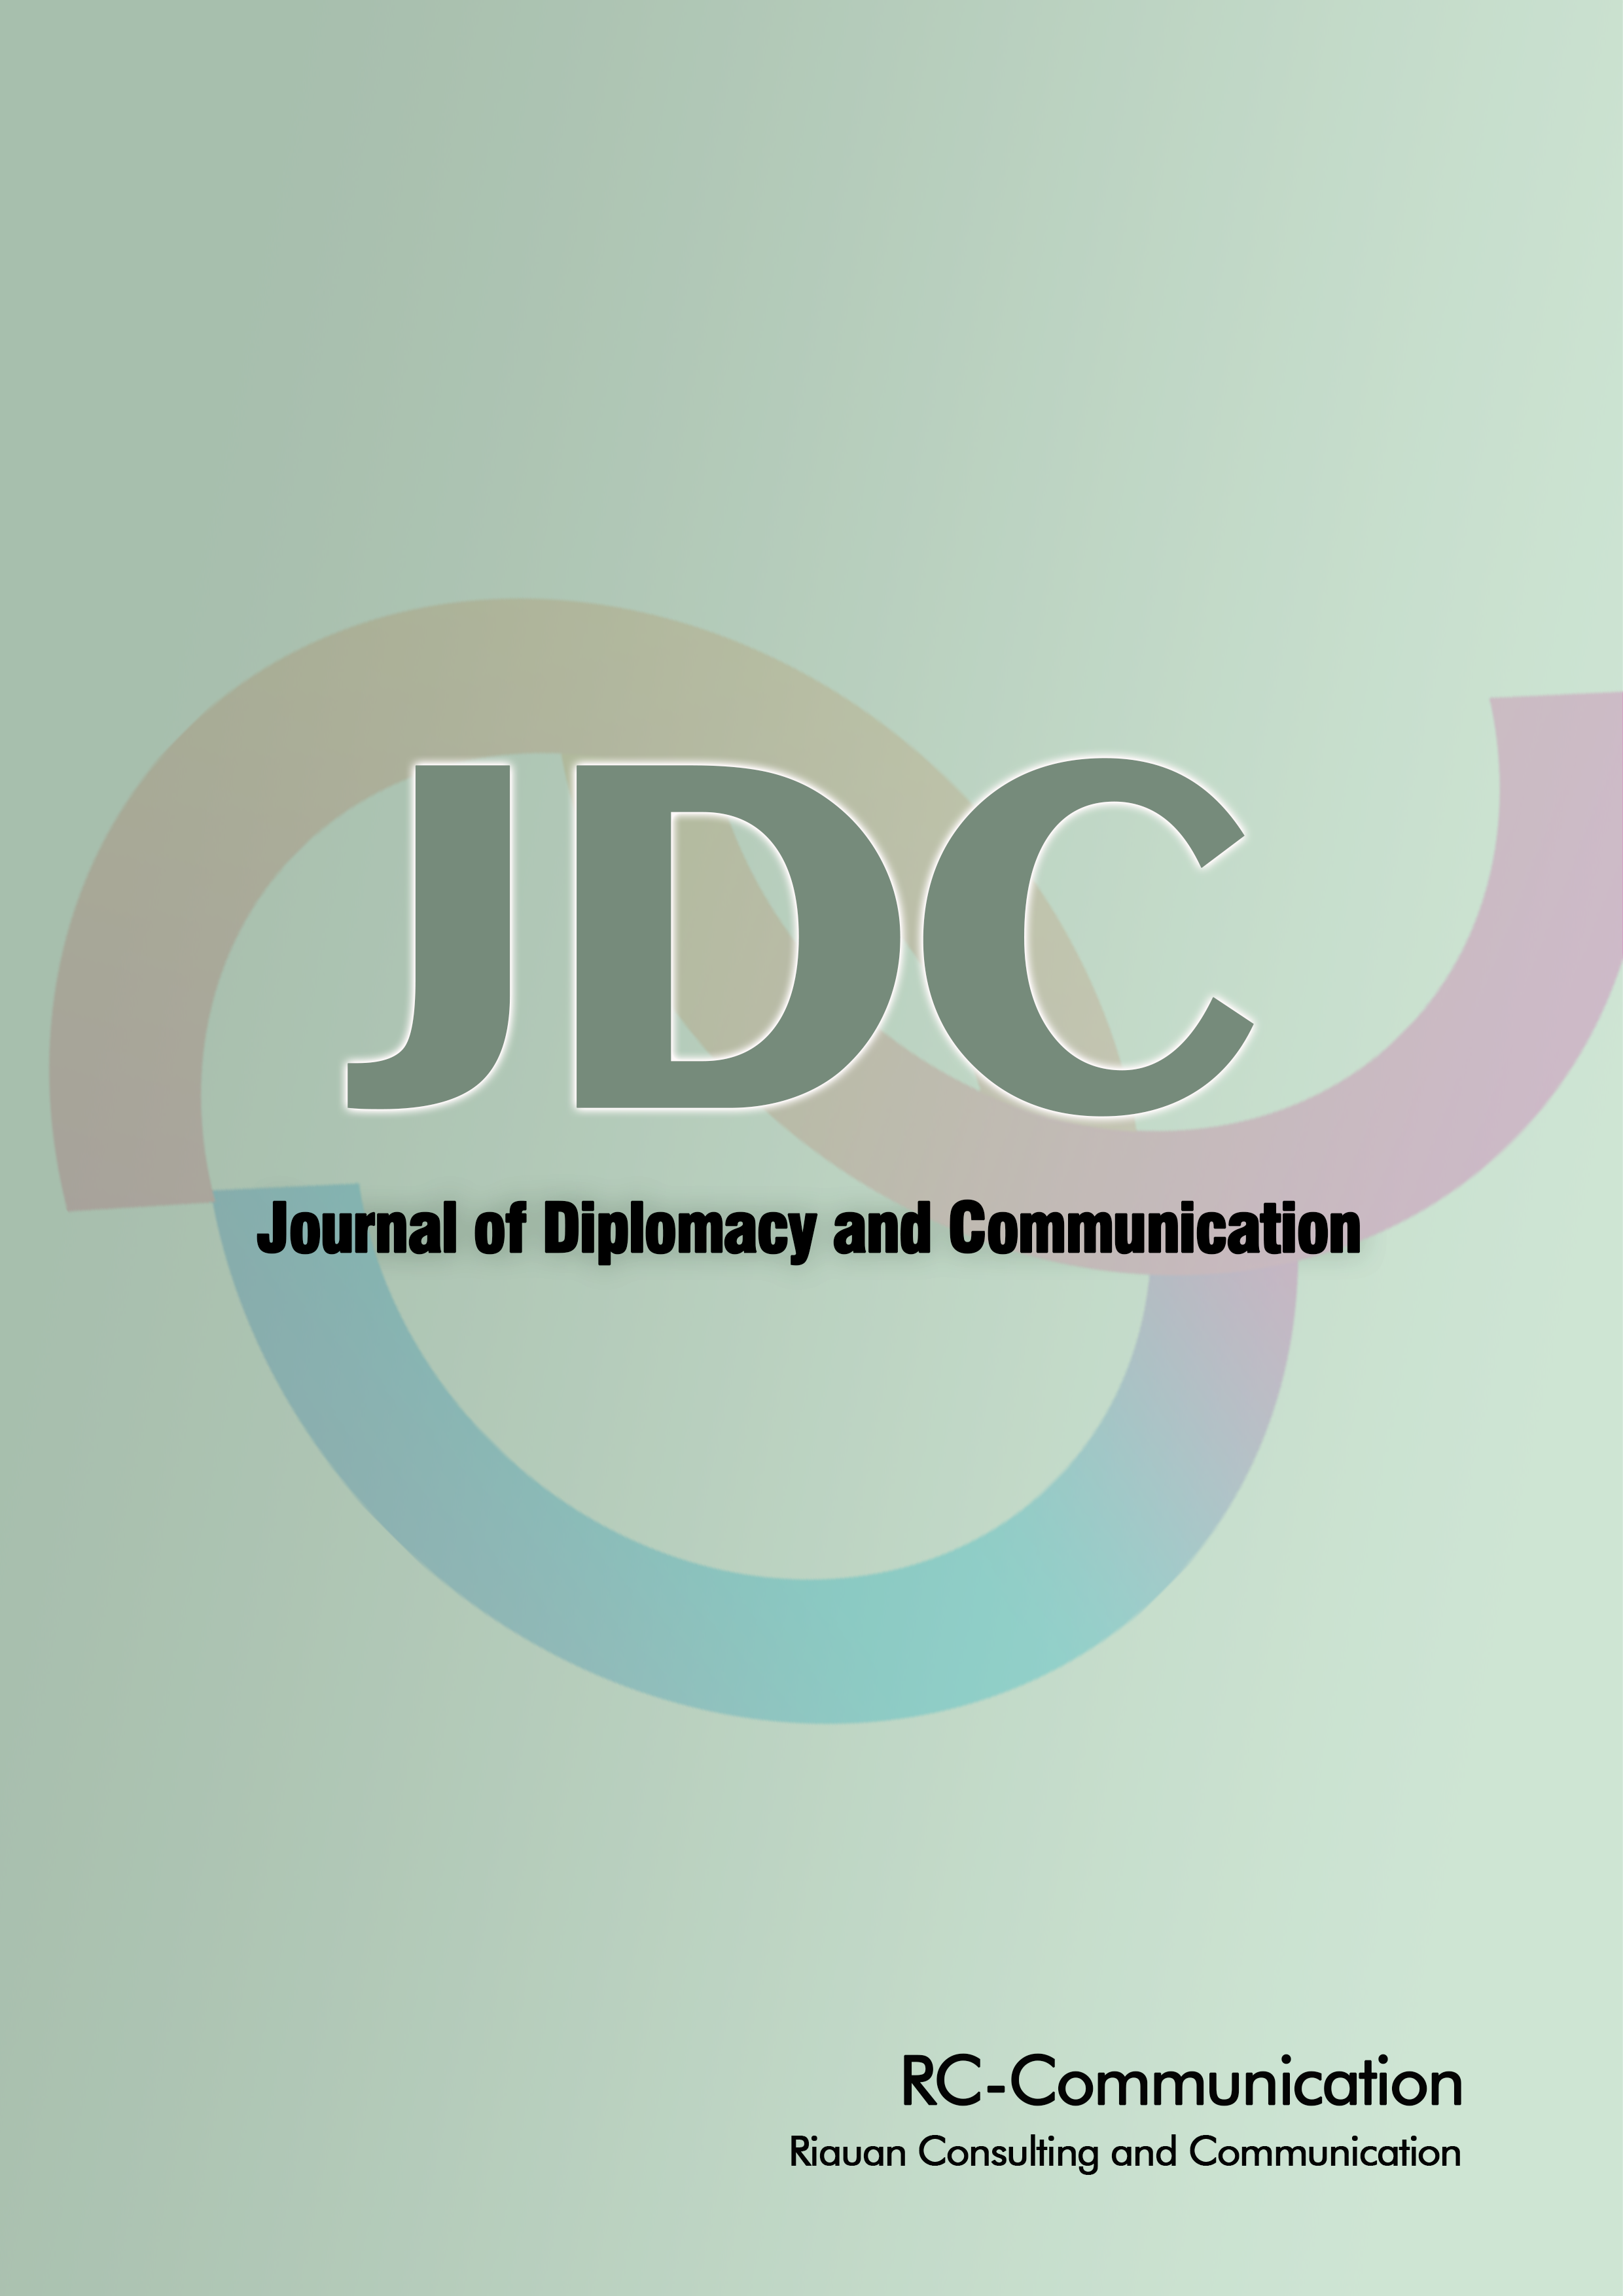 Journal of Diplomacy and Communication